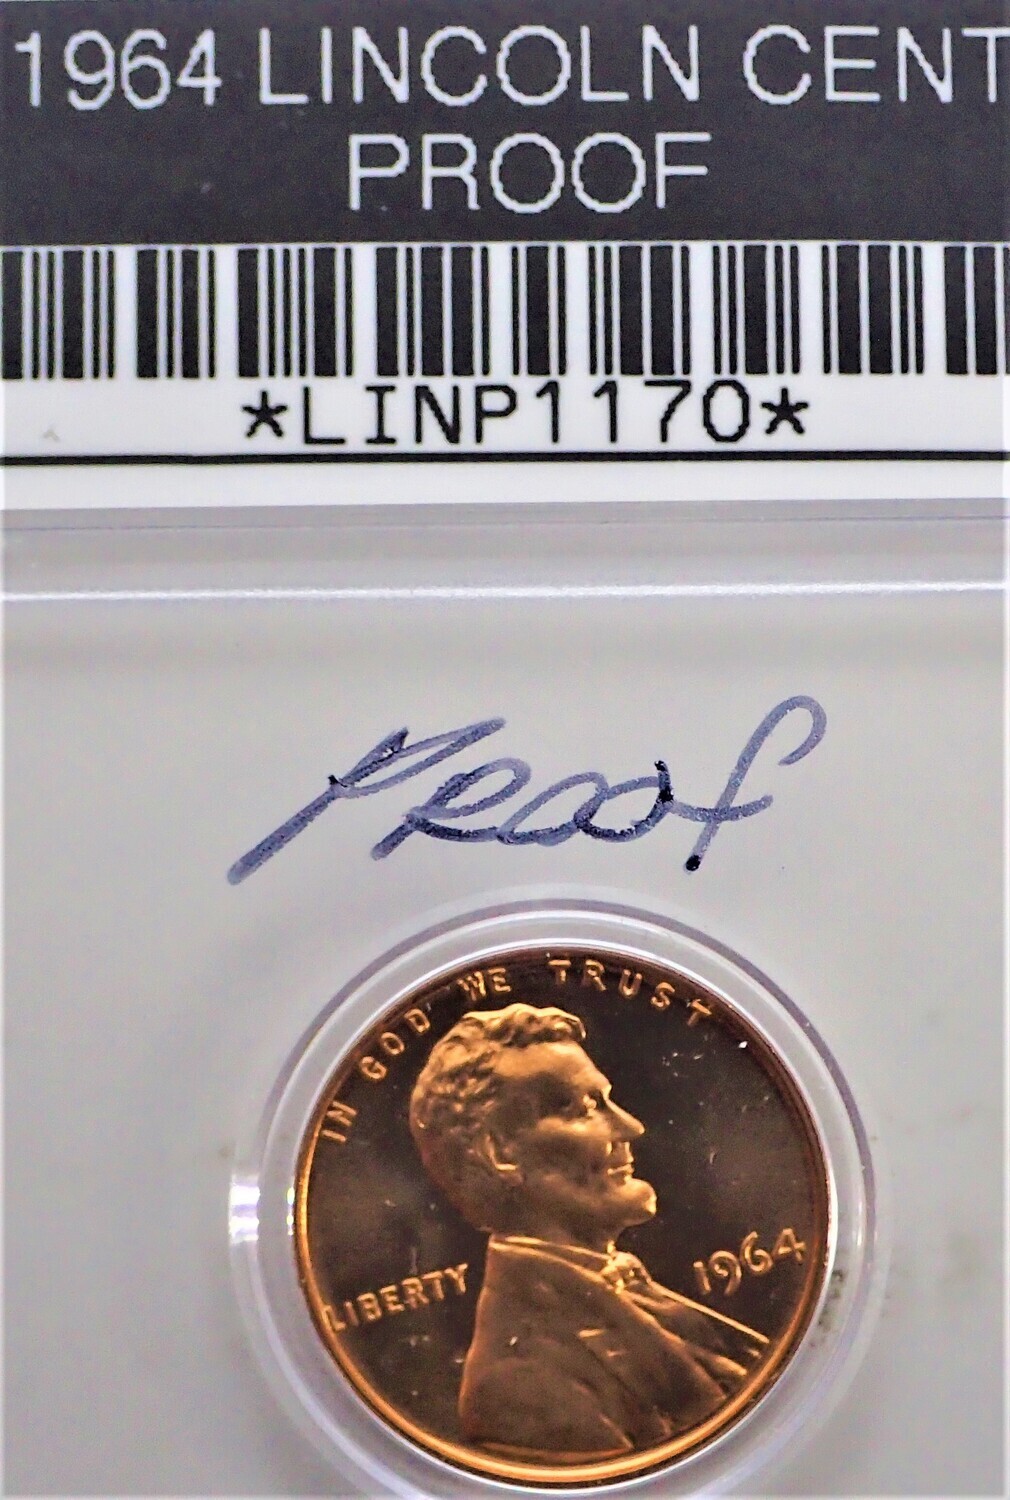 1964 LINCOLN CENT PROOF LINP1170